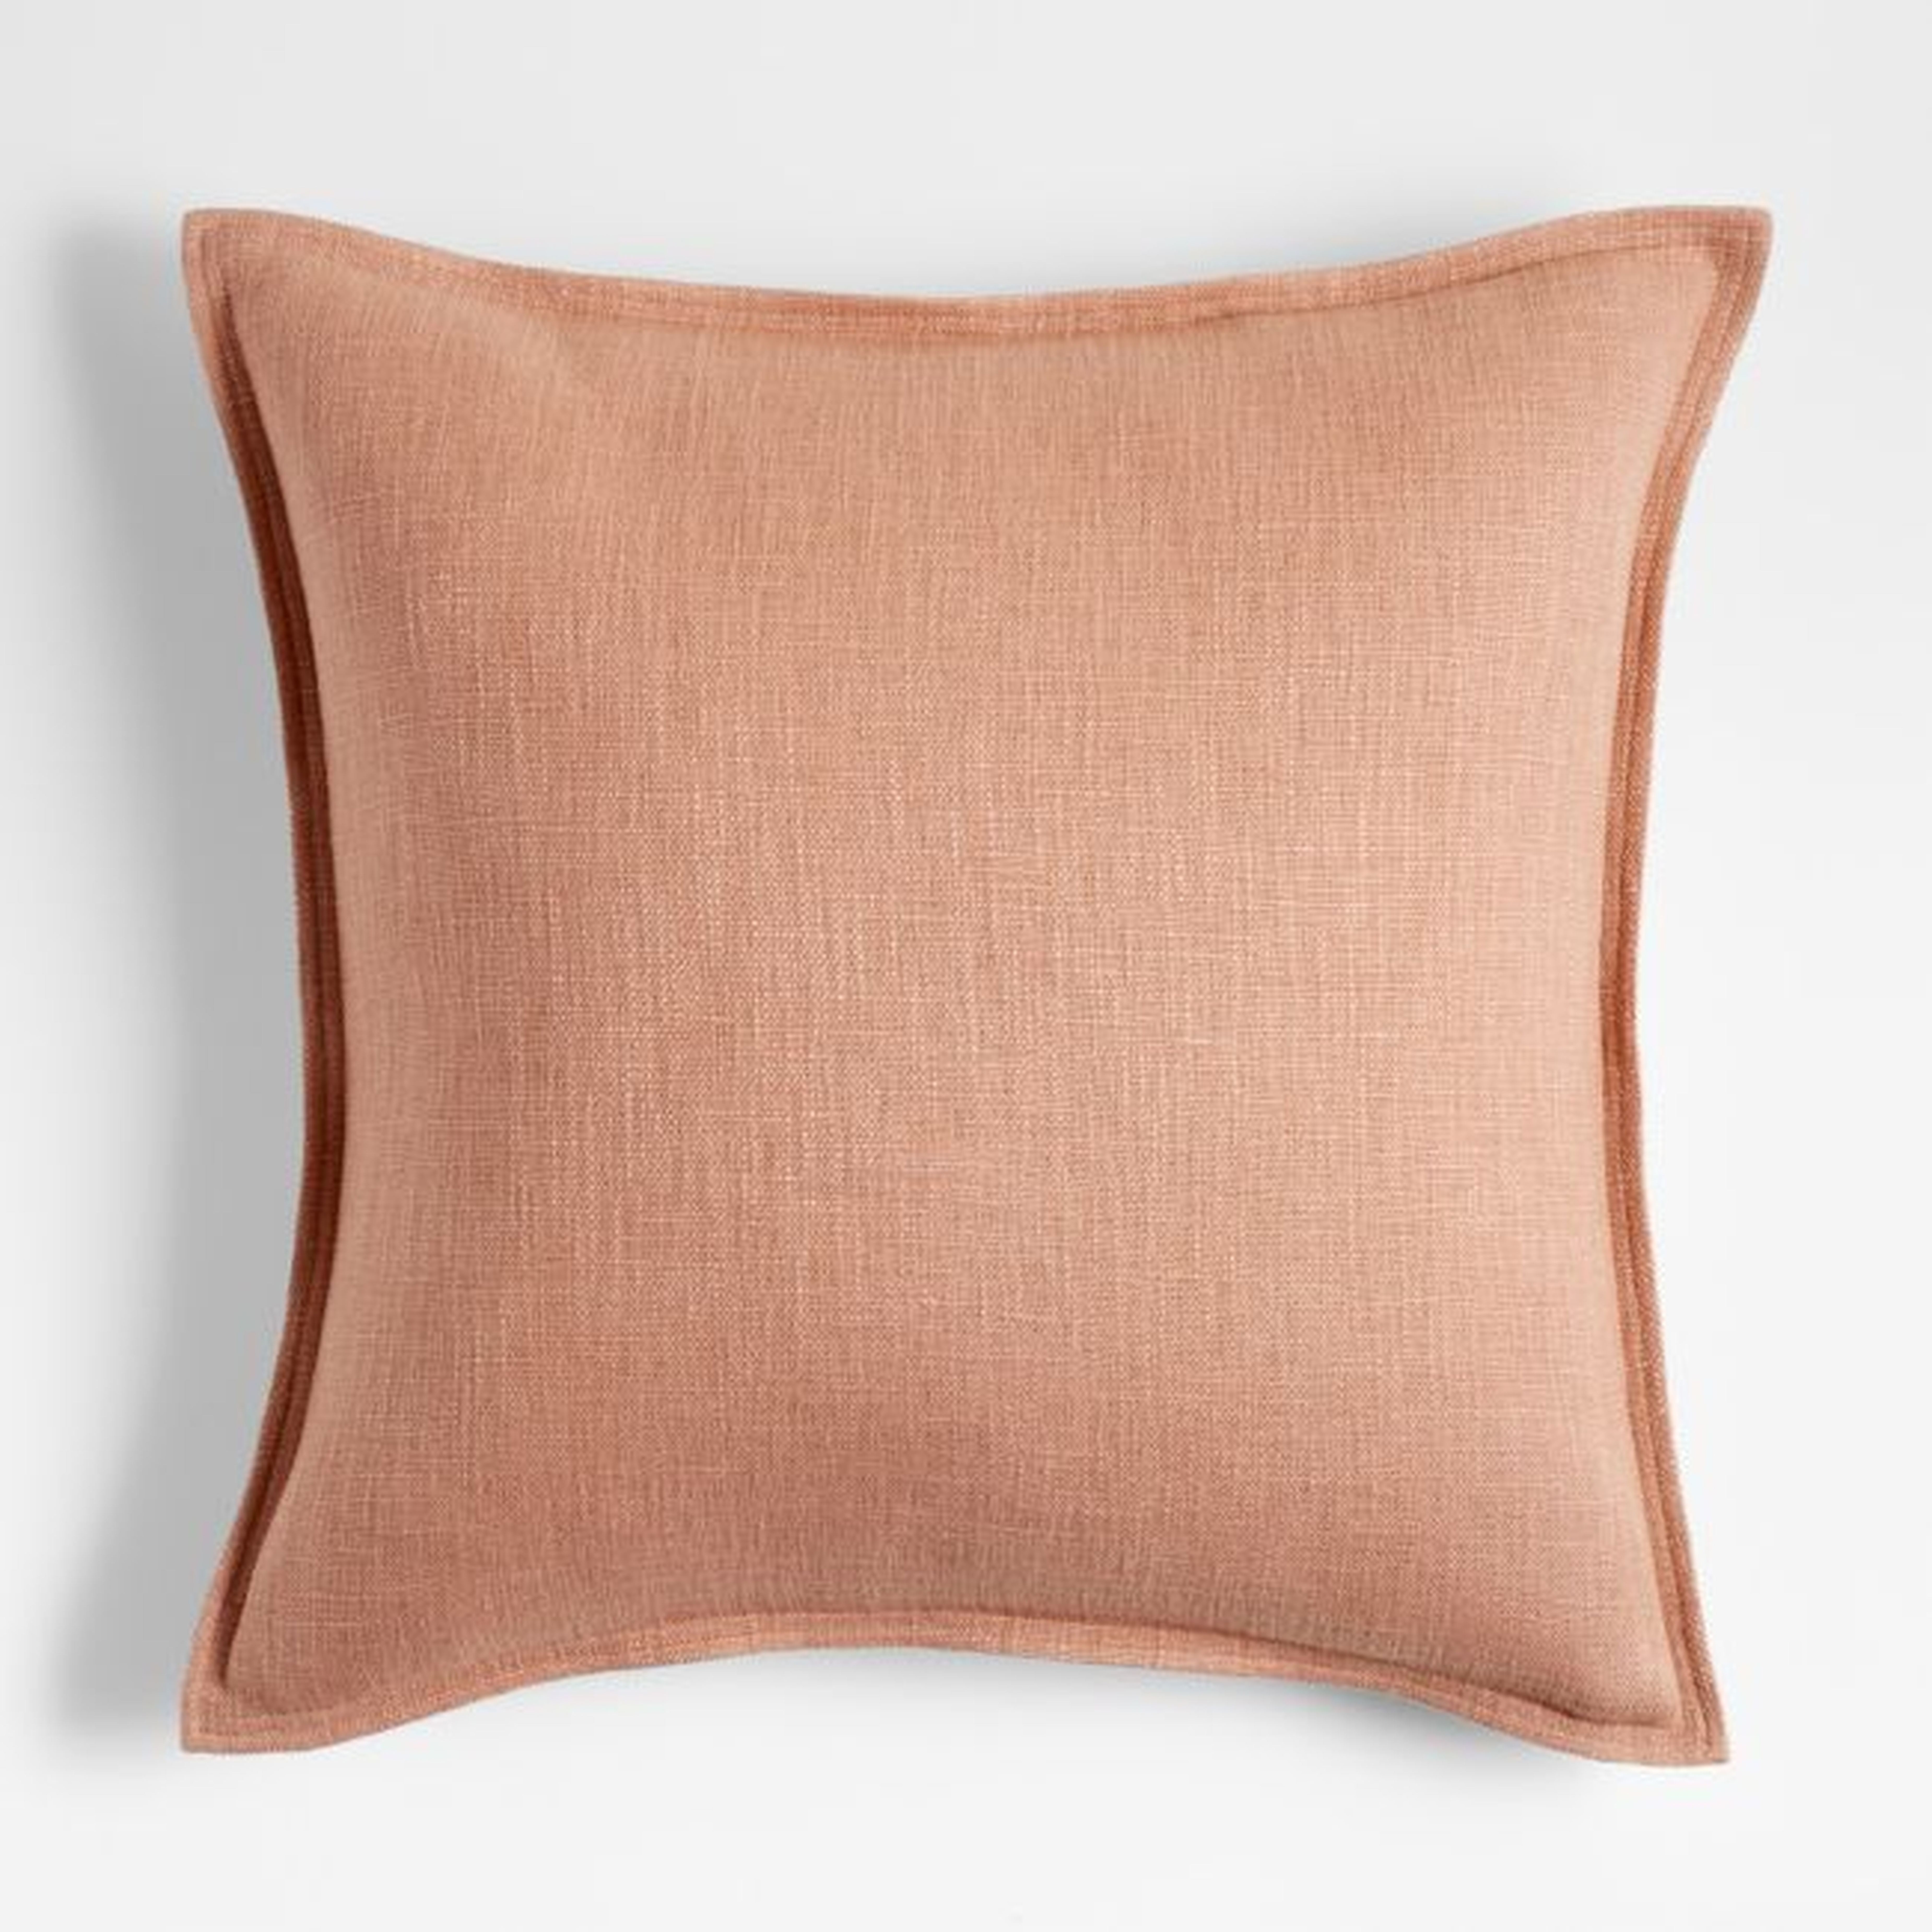 Terracotta 20"x20" Laundered Linen Throw Pillow Cover - Crate and Barrel